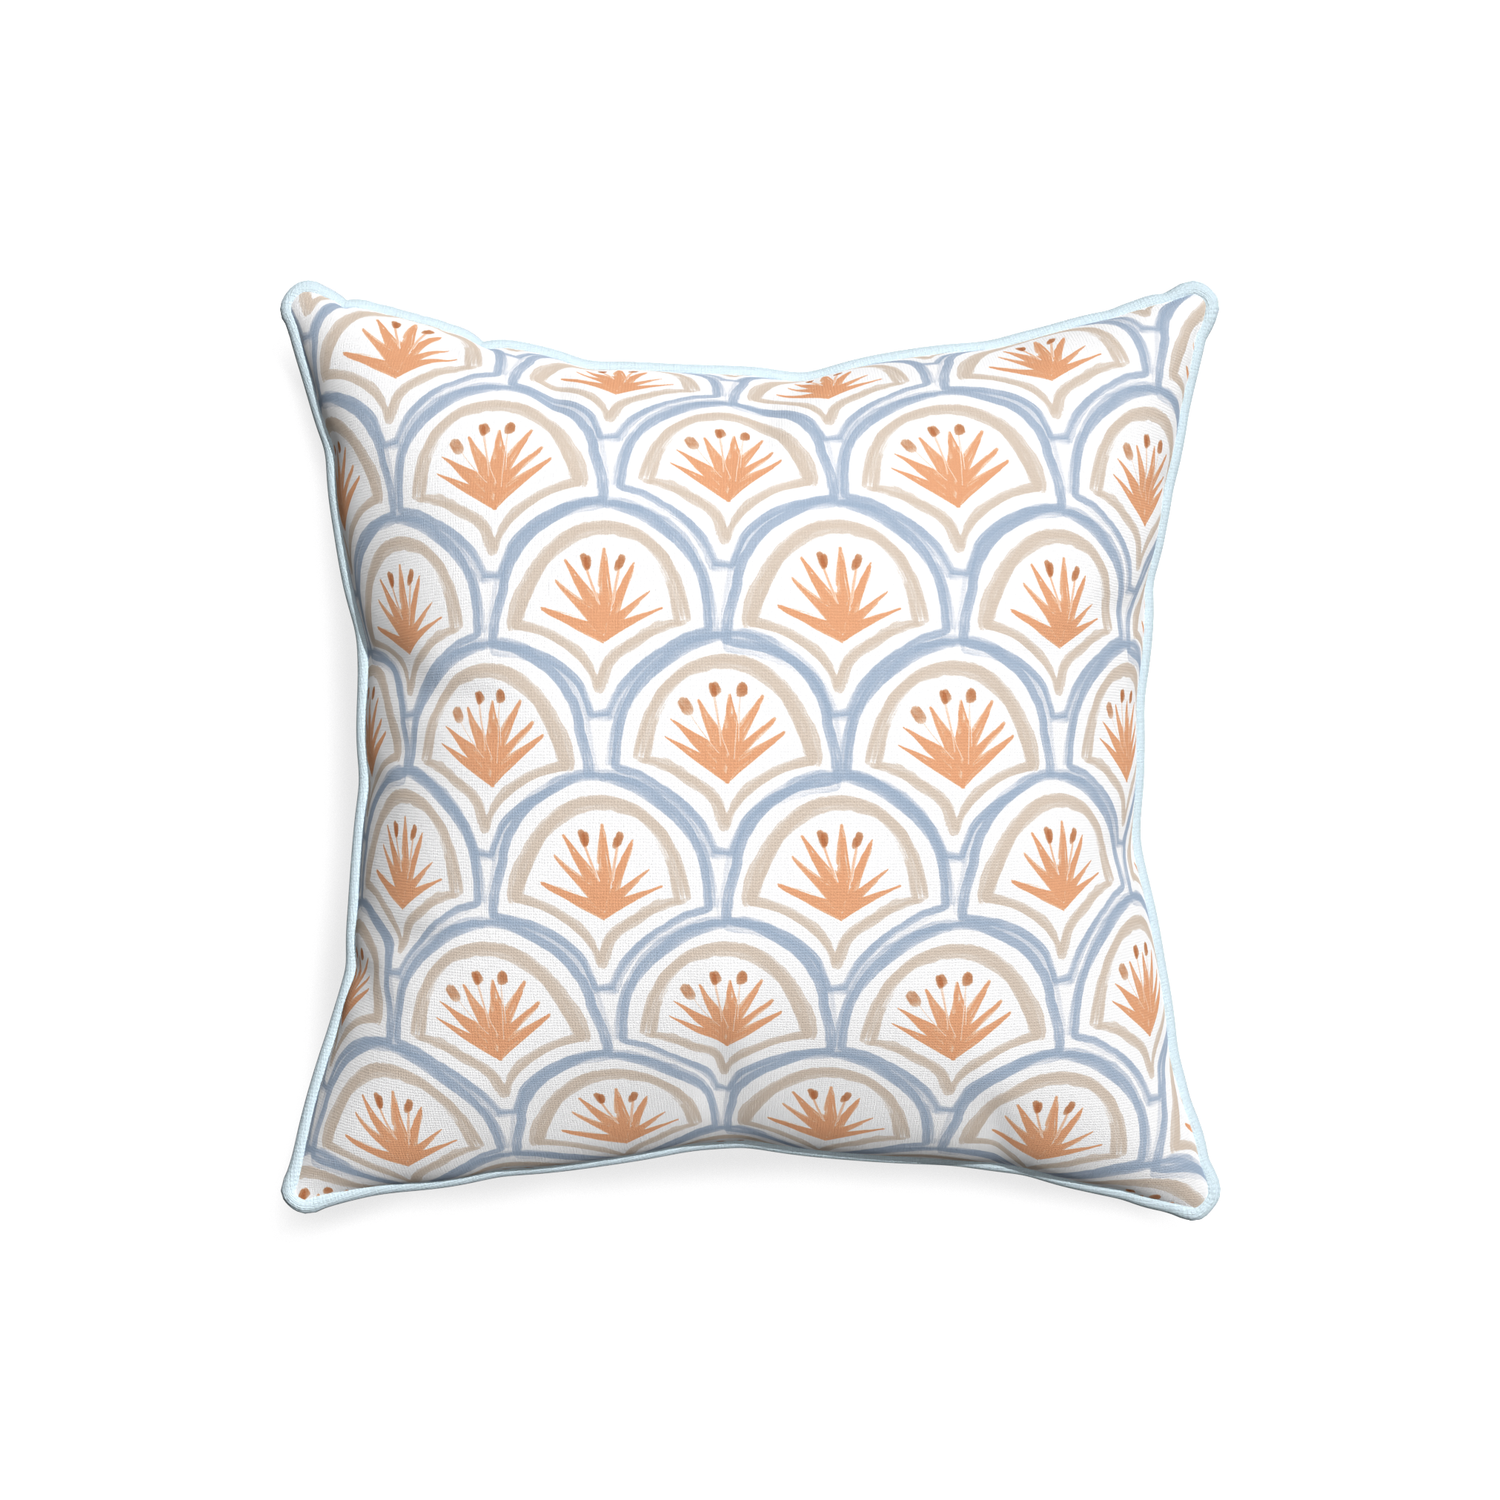 20-square thatcher apricot custom art deco palm patternpillow with powder piping on white background